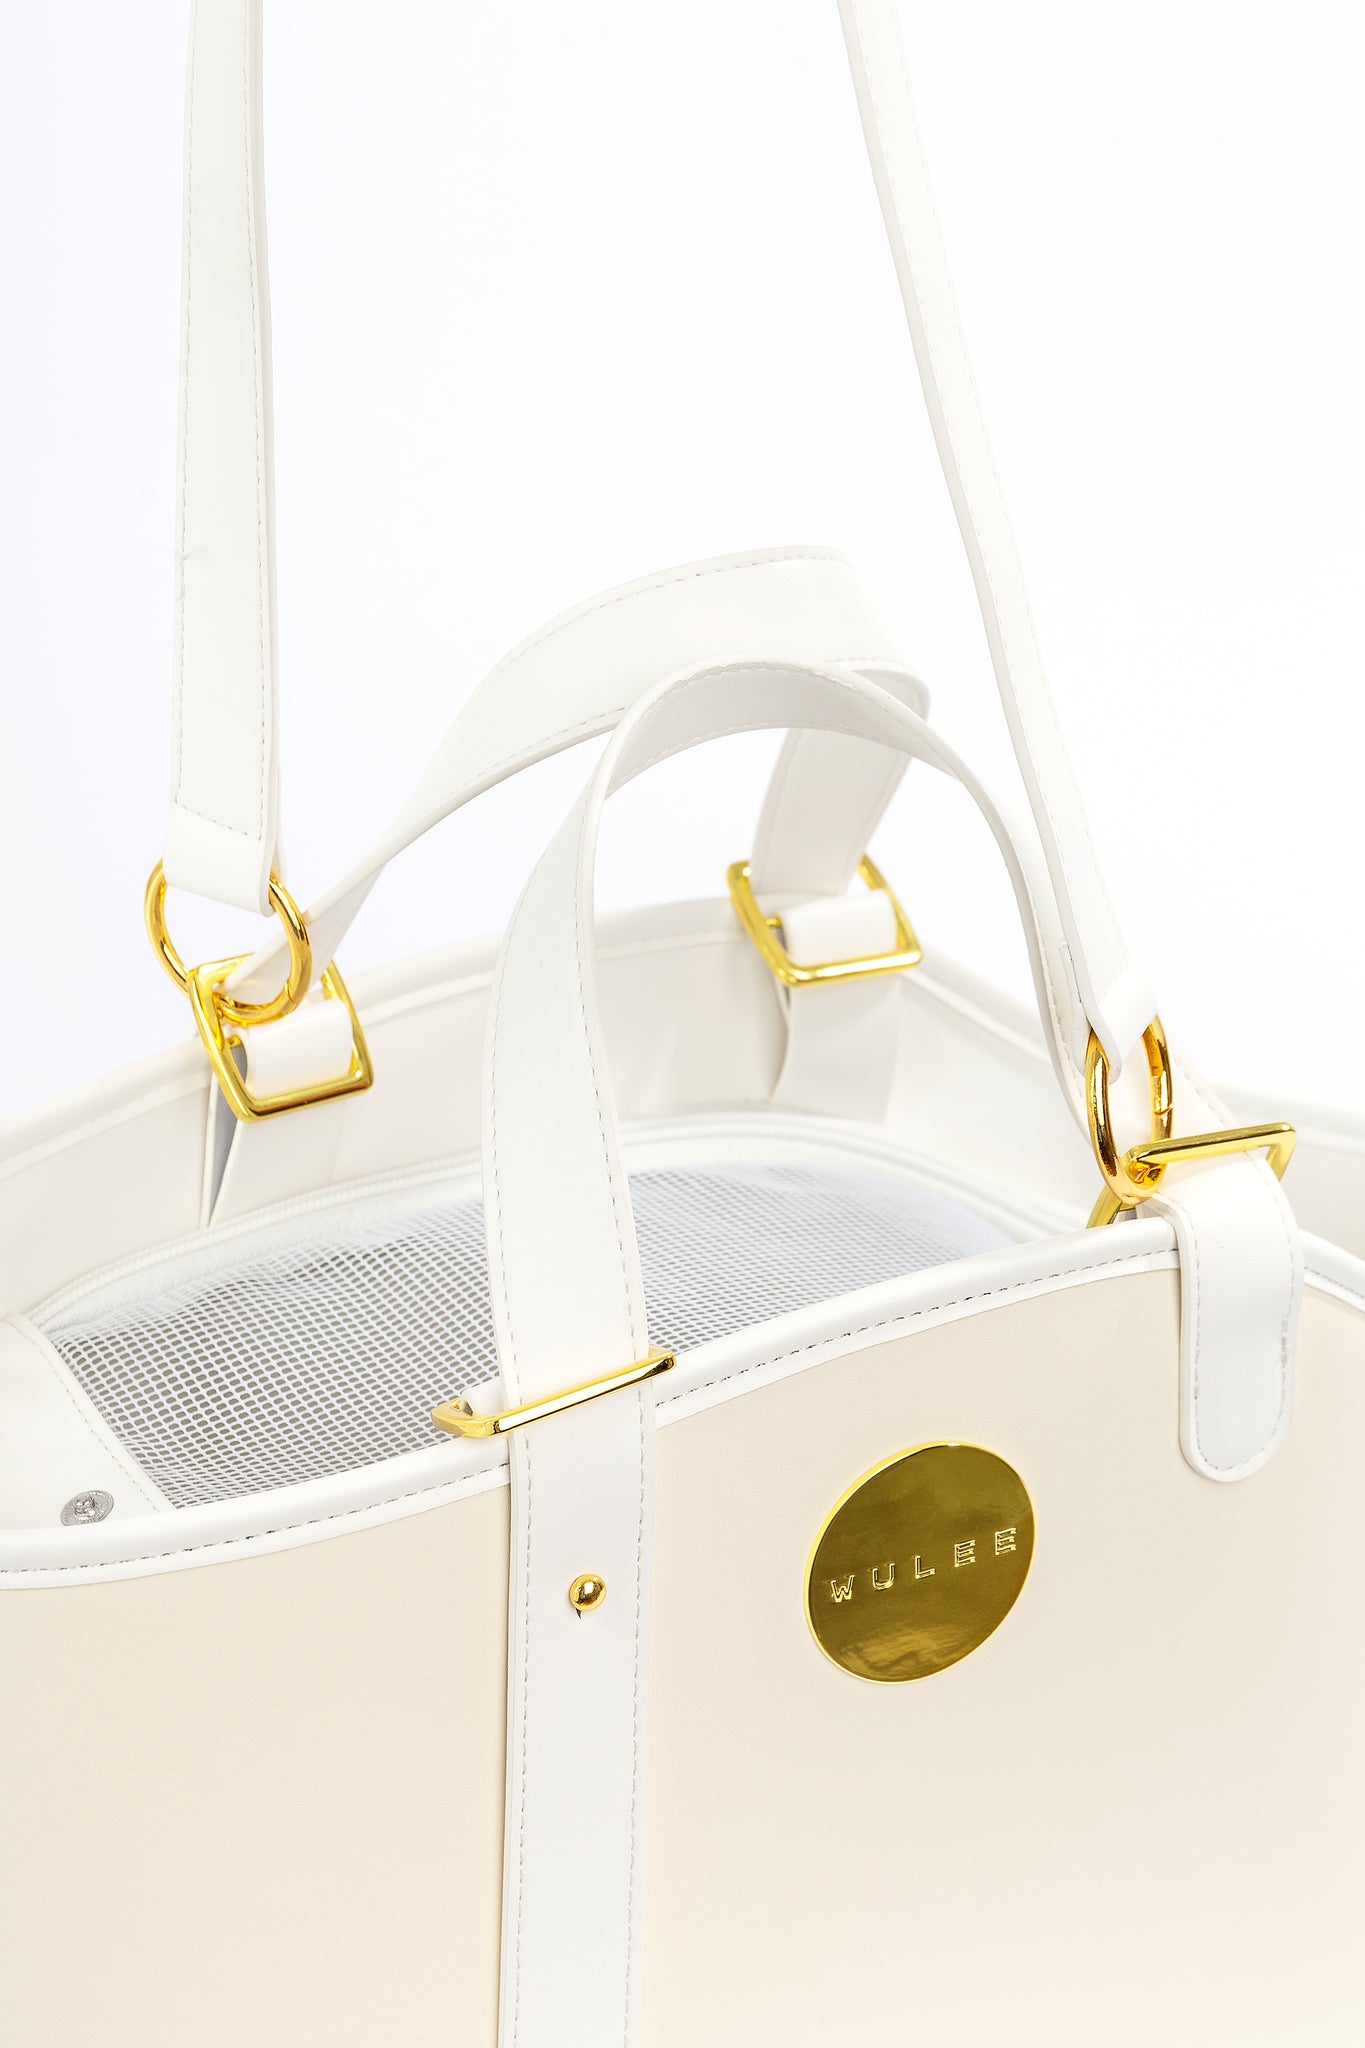 Chic Pet Carrier